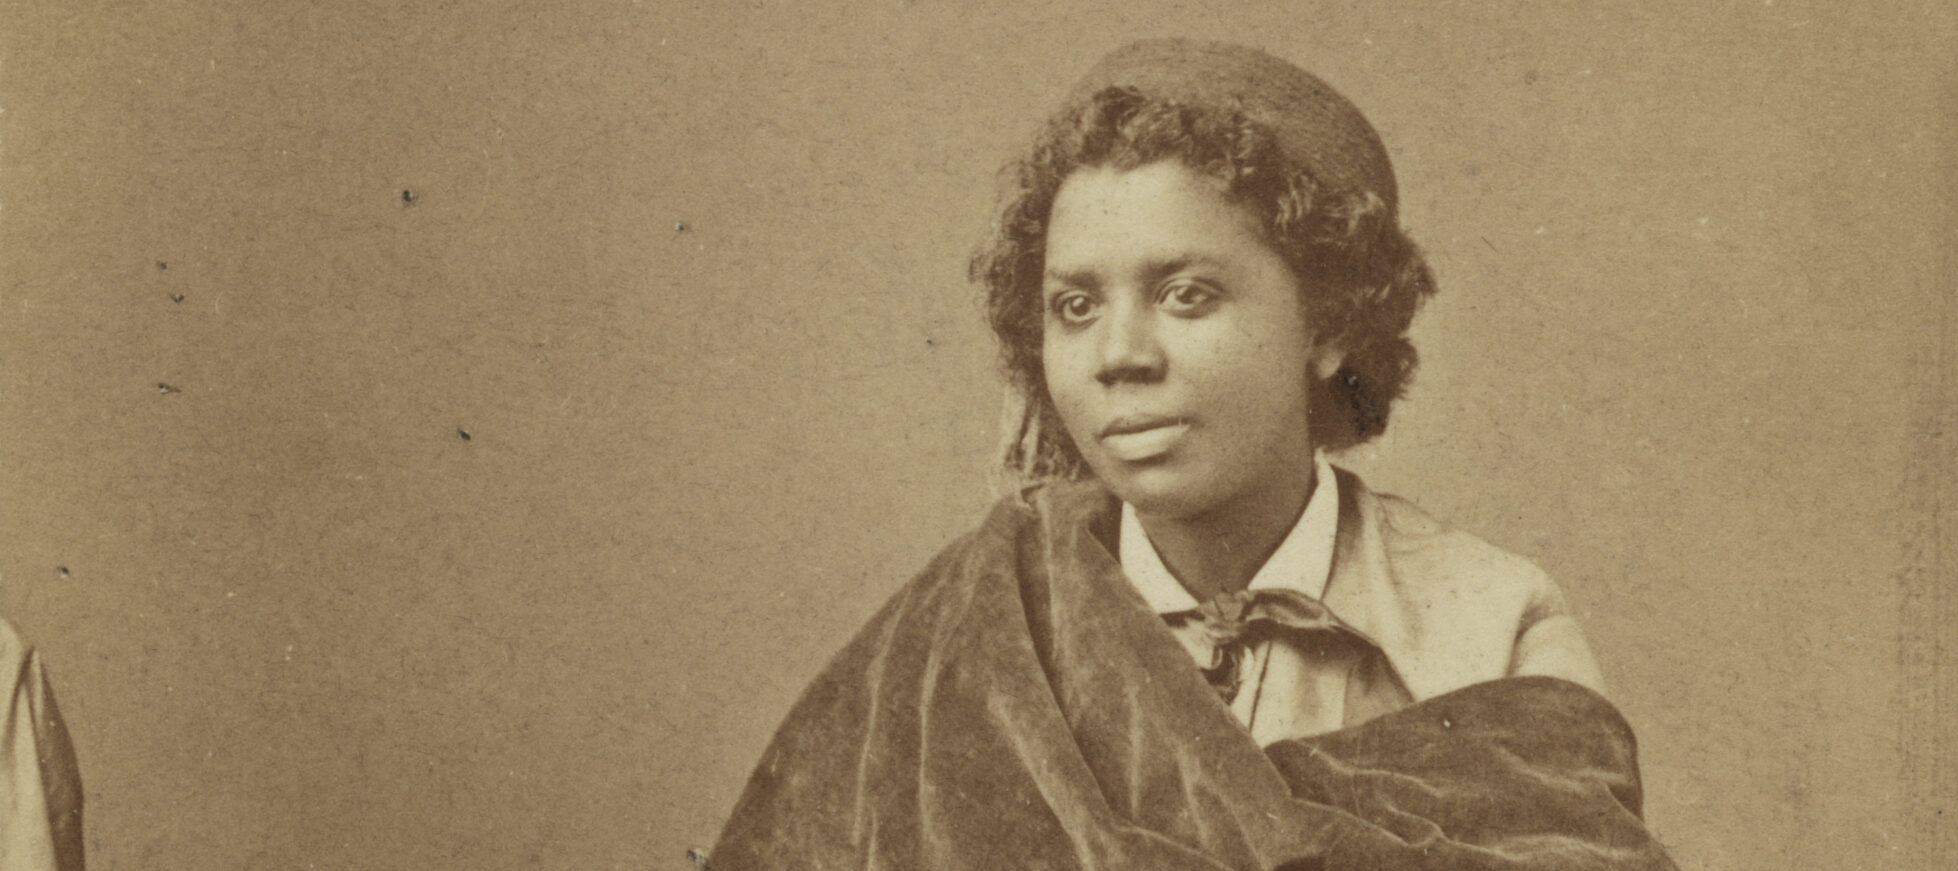 A black and white photograph from the late 1800s of a dark skinned woman seated on an upholstered chair with fringe around the arm and seat. She is wearing a white collared shirt with a scarf tied around her neck, a light colored jacket and a matching ankle length skirt. There is heavy, dark colored velvet fabric draped from her right shoulder to her left arm. She is wearing a round, flat-topped hat over her short wavy hair.